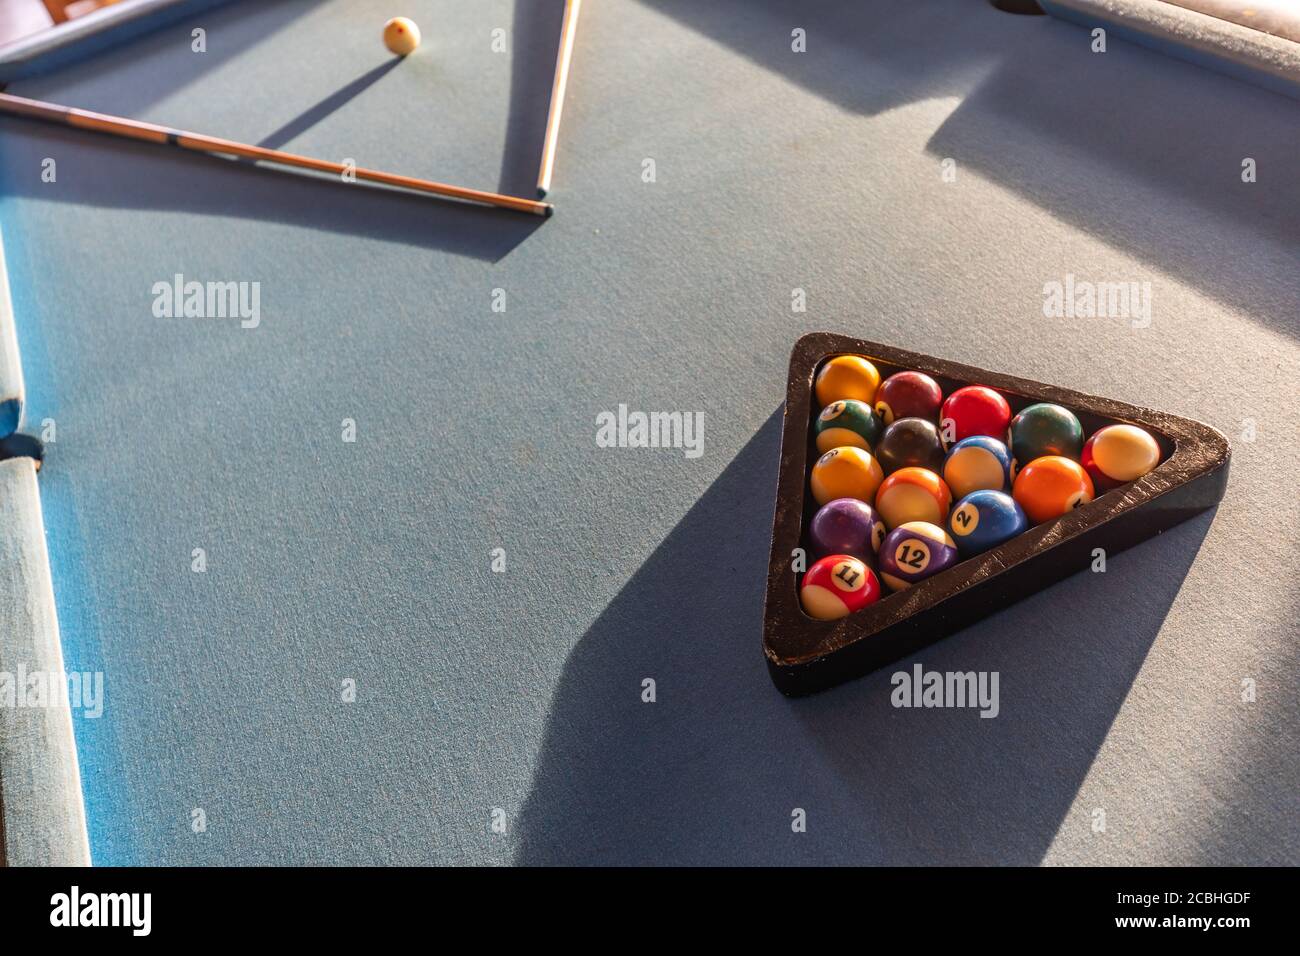 Billiard balls in a pool table in abstract light. Billiard balls in a green pool table, game. Billiard table with cue and balls. Snooker billiard game Stock Photo